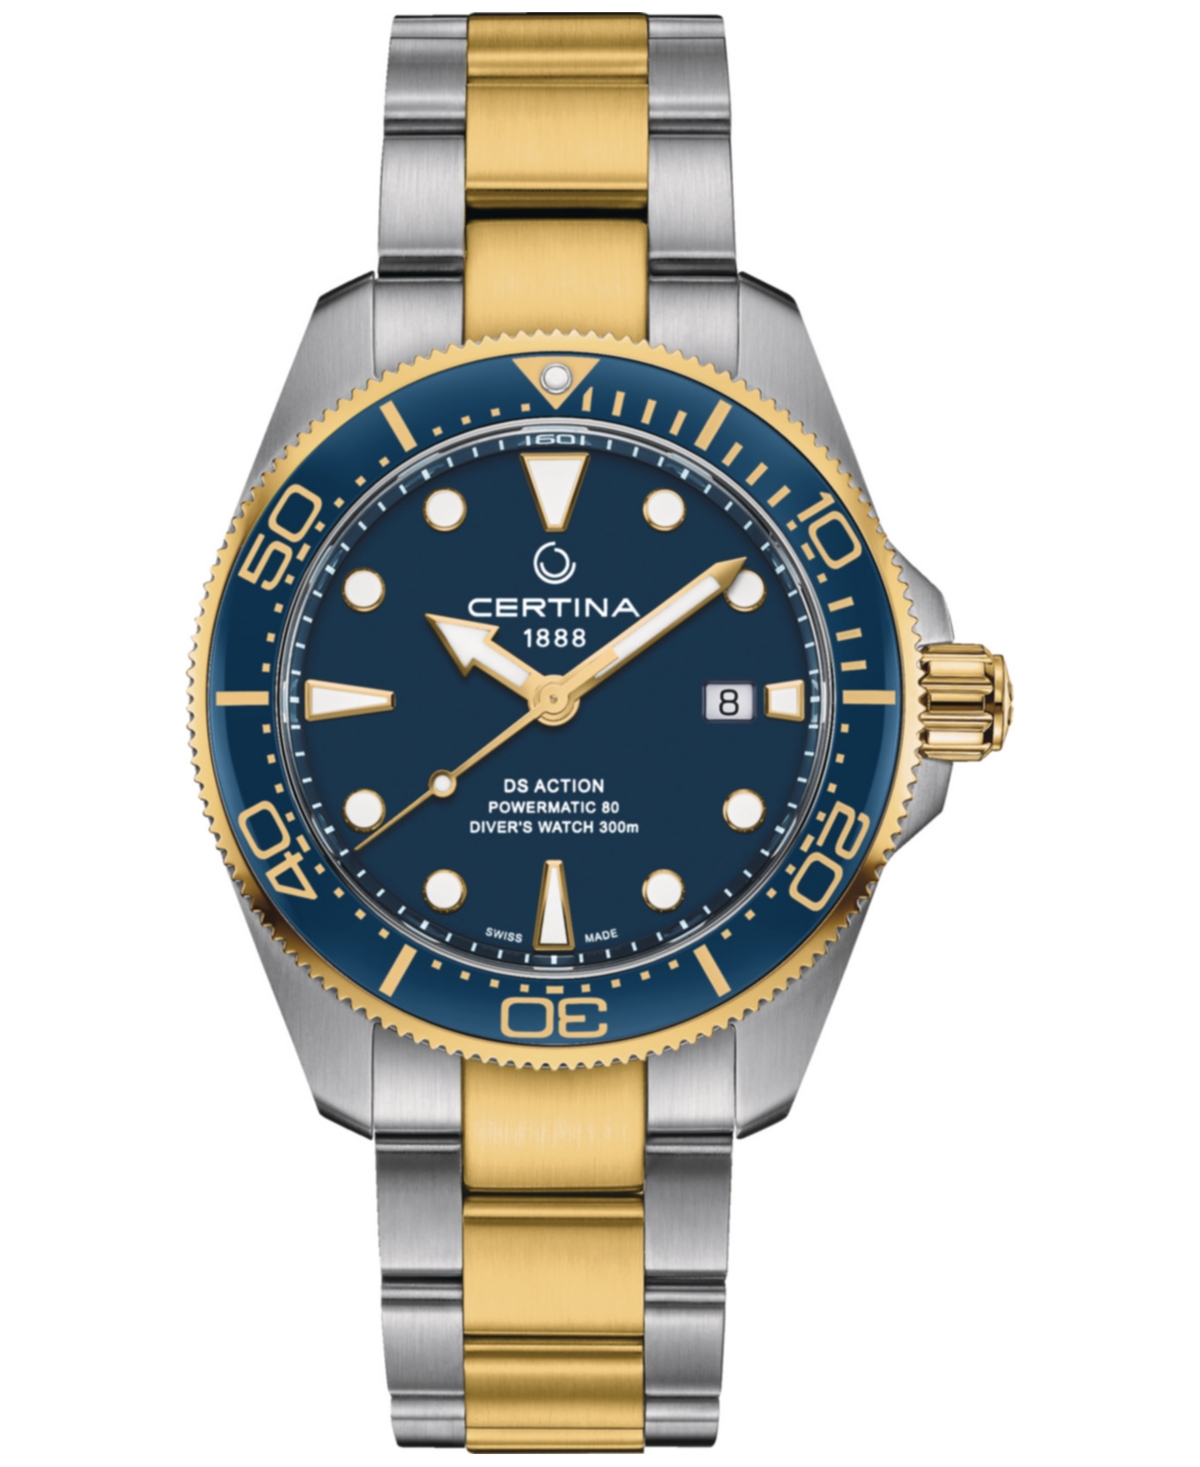 Certina Men's Swiss Automatic Ds Action Diver Two-tone Stainless Steel Bracelet Watch 43mm In Blue